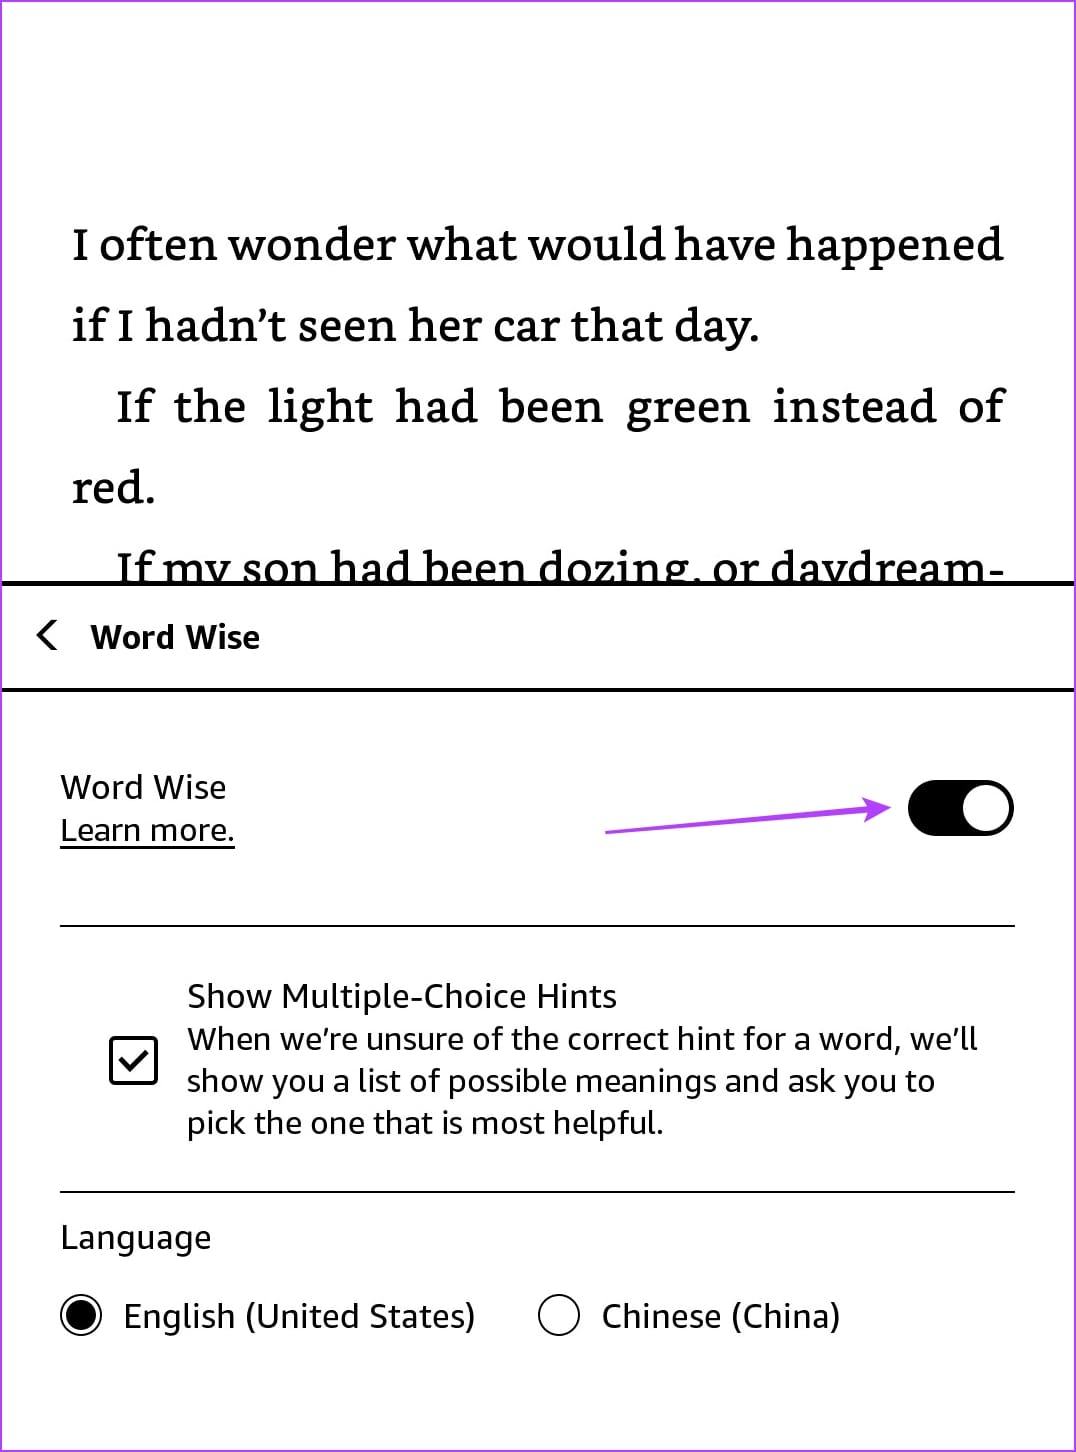 Turn off toggle for Word Wise